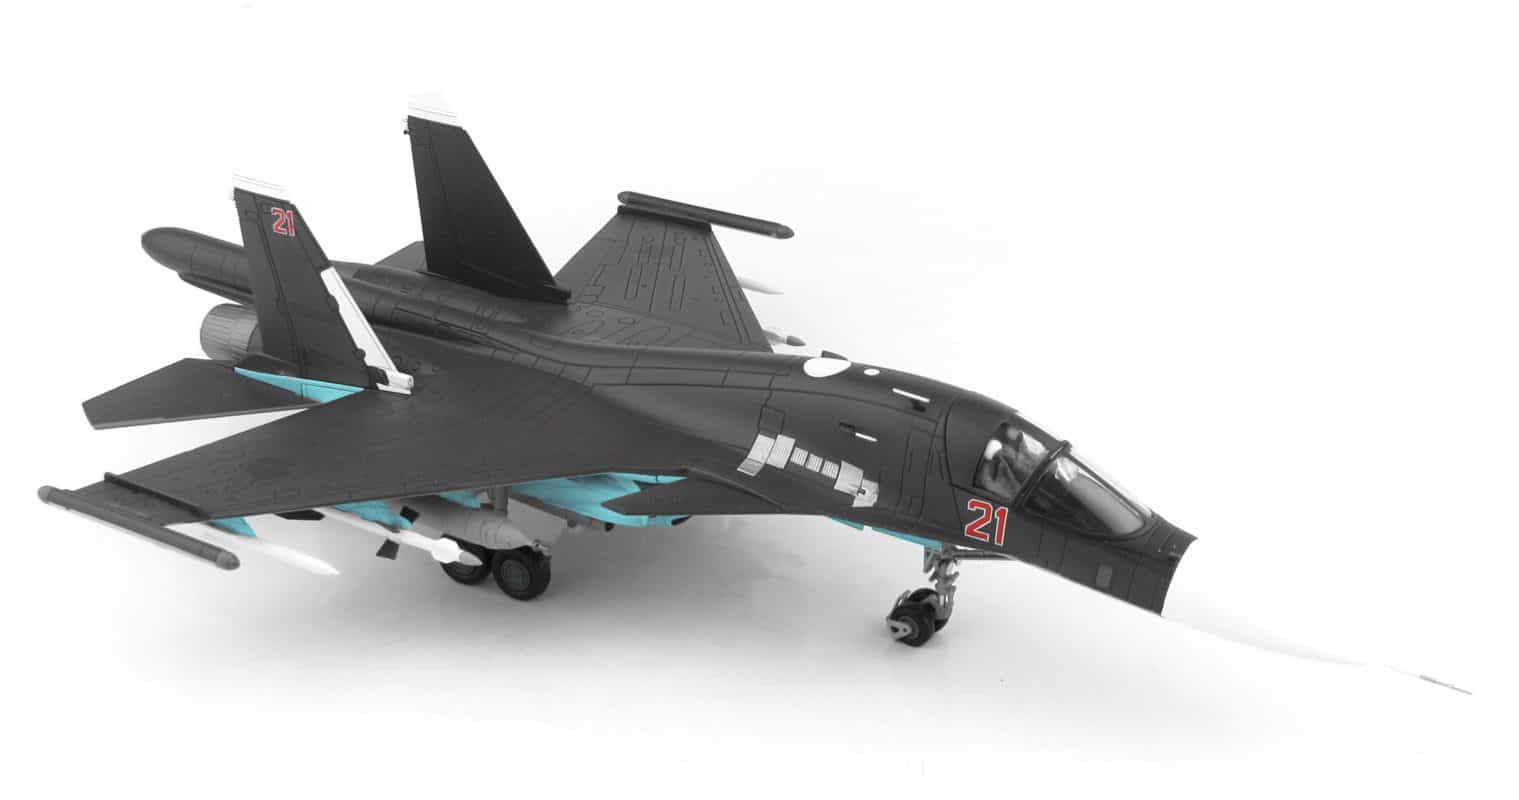 Front starboard side view of Hobby Master HA6302A - 1/72 scale diecast model of the Sukhoi Su-34 s/n RF-95002, Bort # 